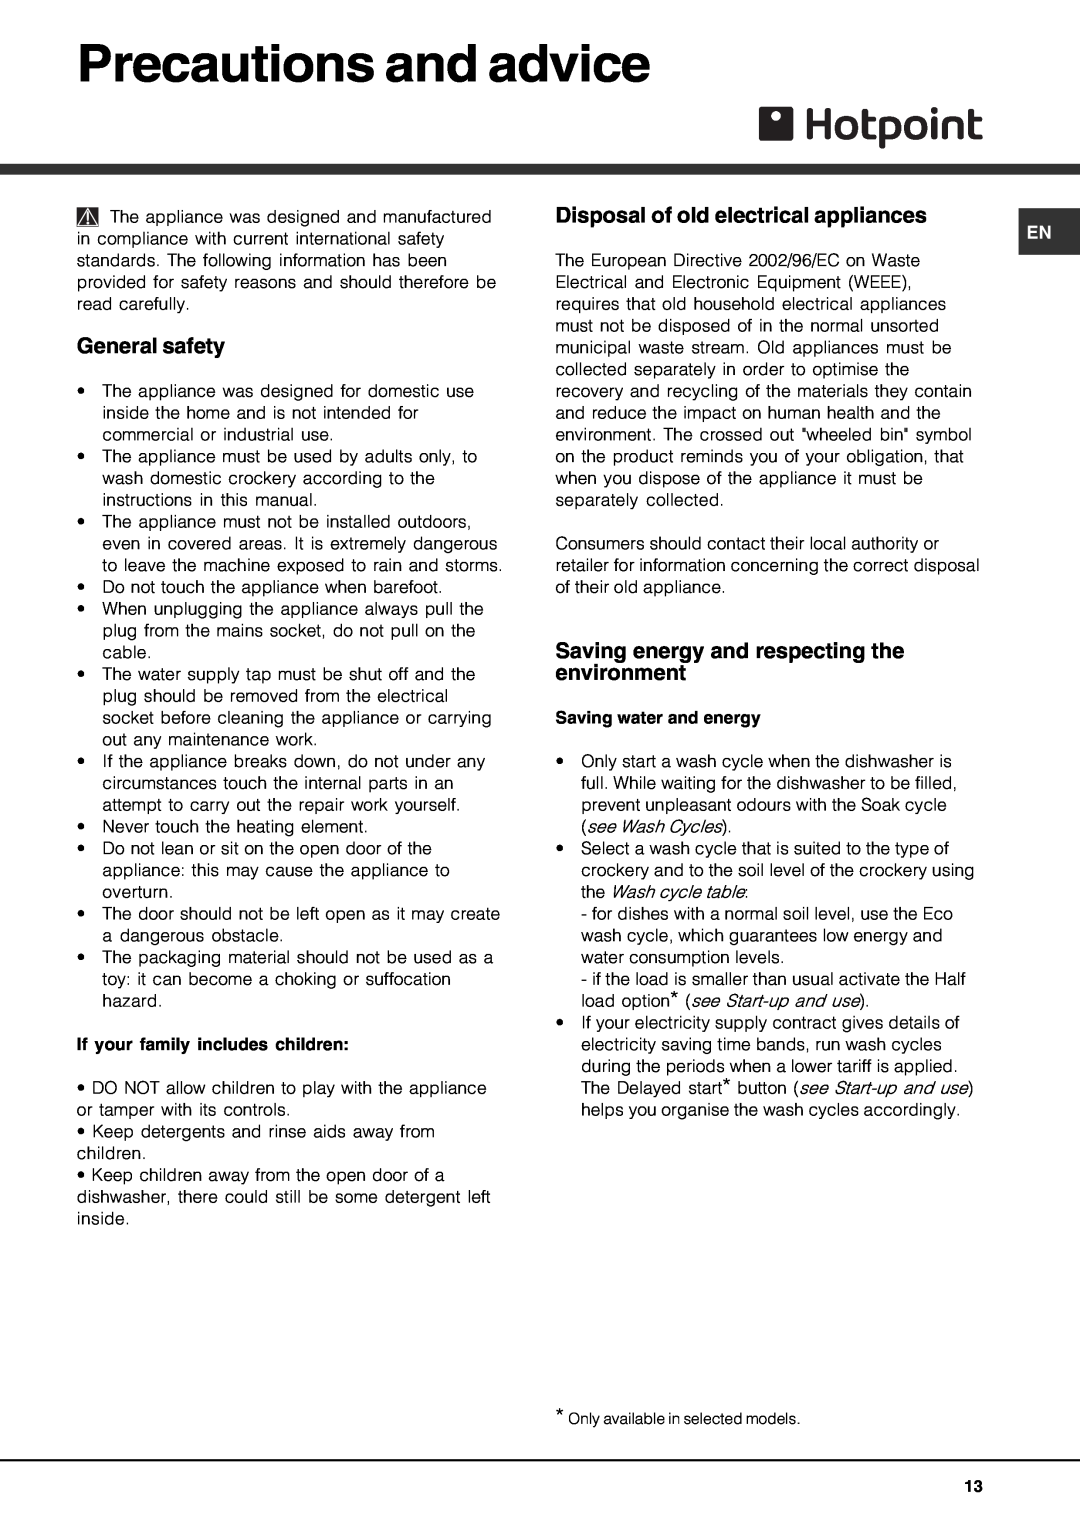 Hotpoint FDF-780 manual Precautions and advice, General safety, Disposal of old electrical appliances 